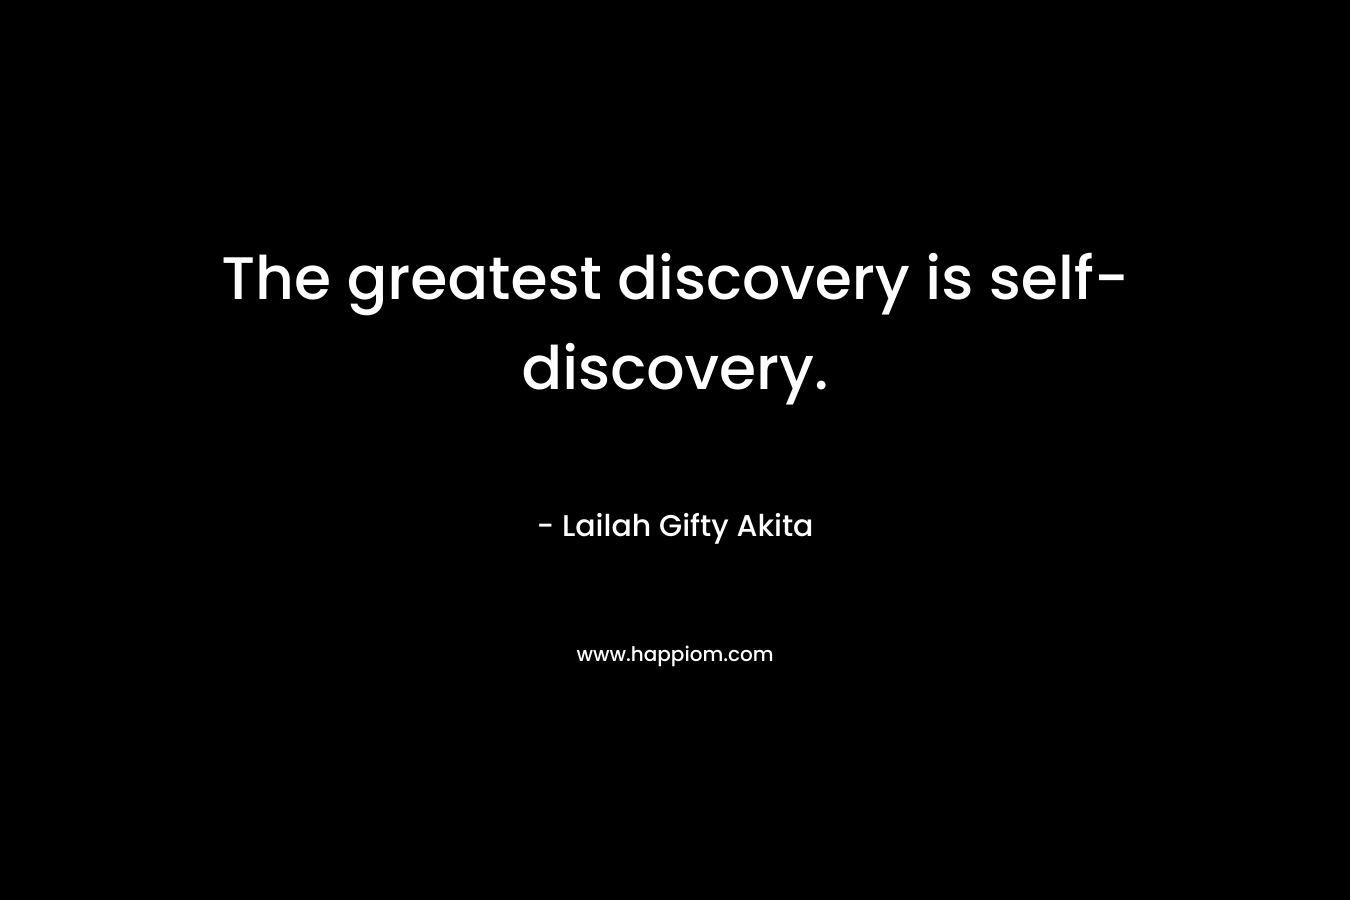 The greatest discovery is self-discovery. – Lailah Gifty Akita